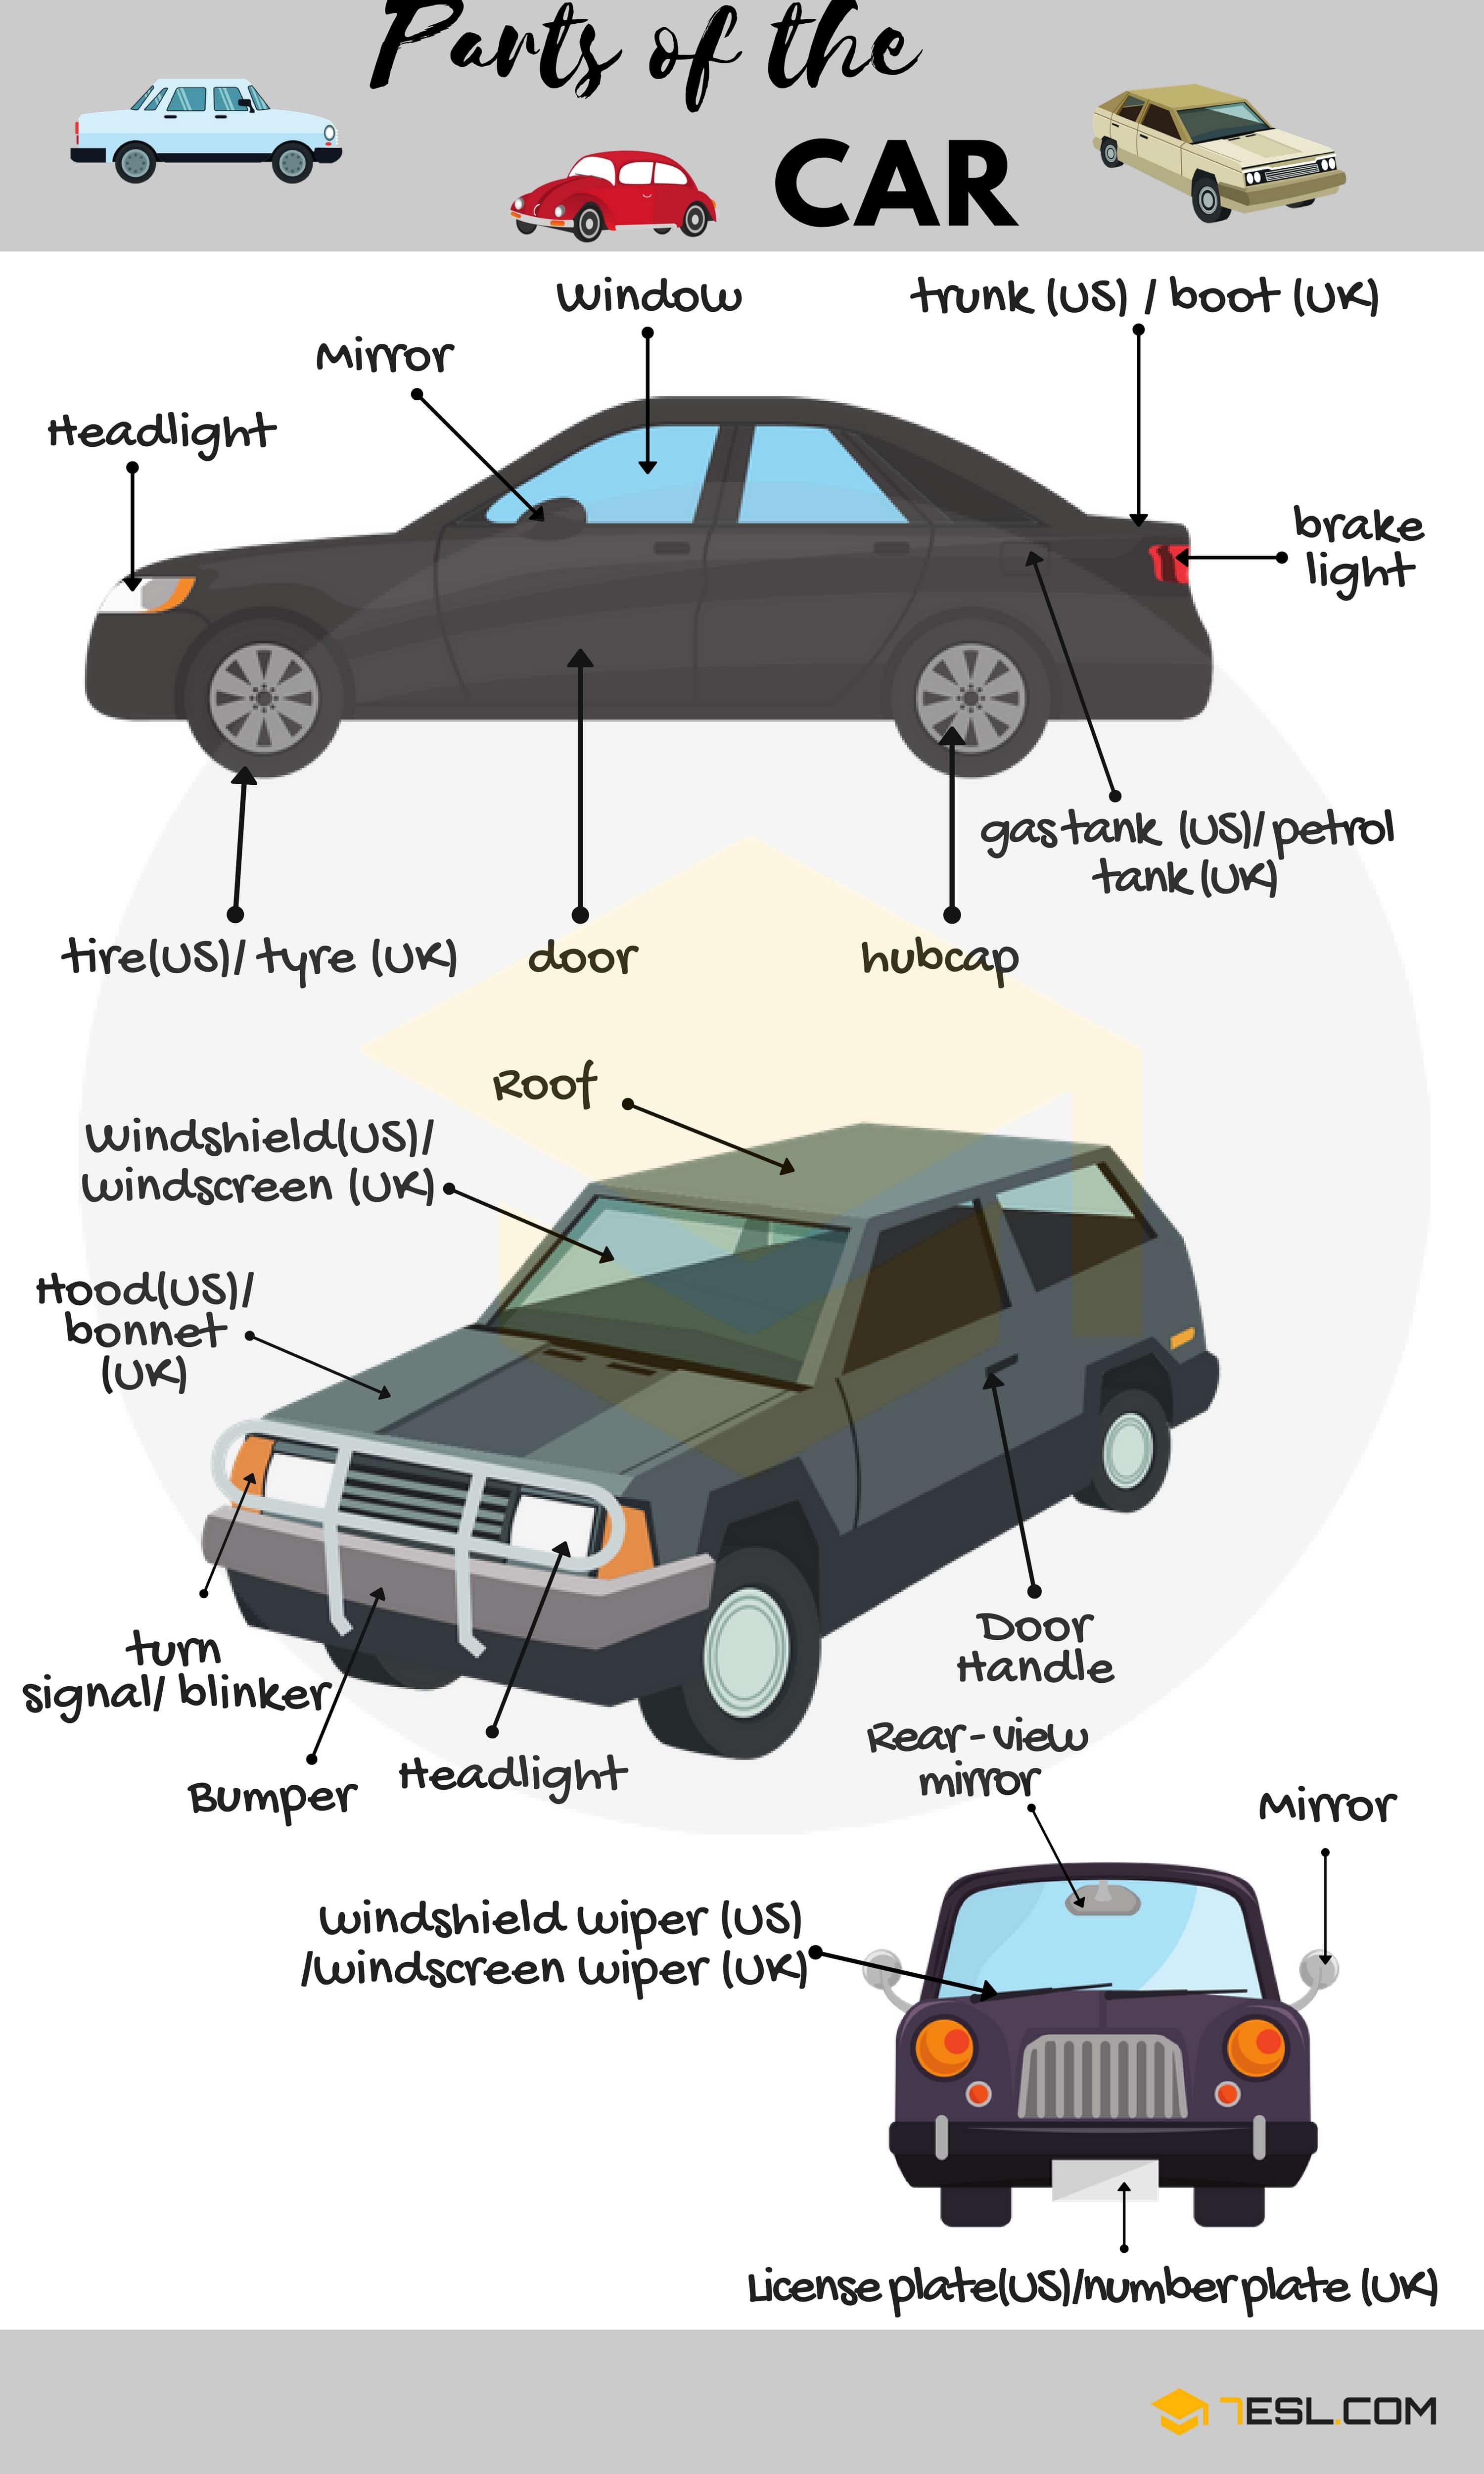 List of Car Parts | Parts of A Car Vocabulary in English - 7 E S L